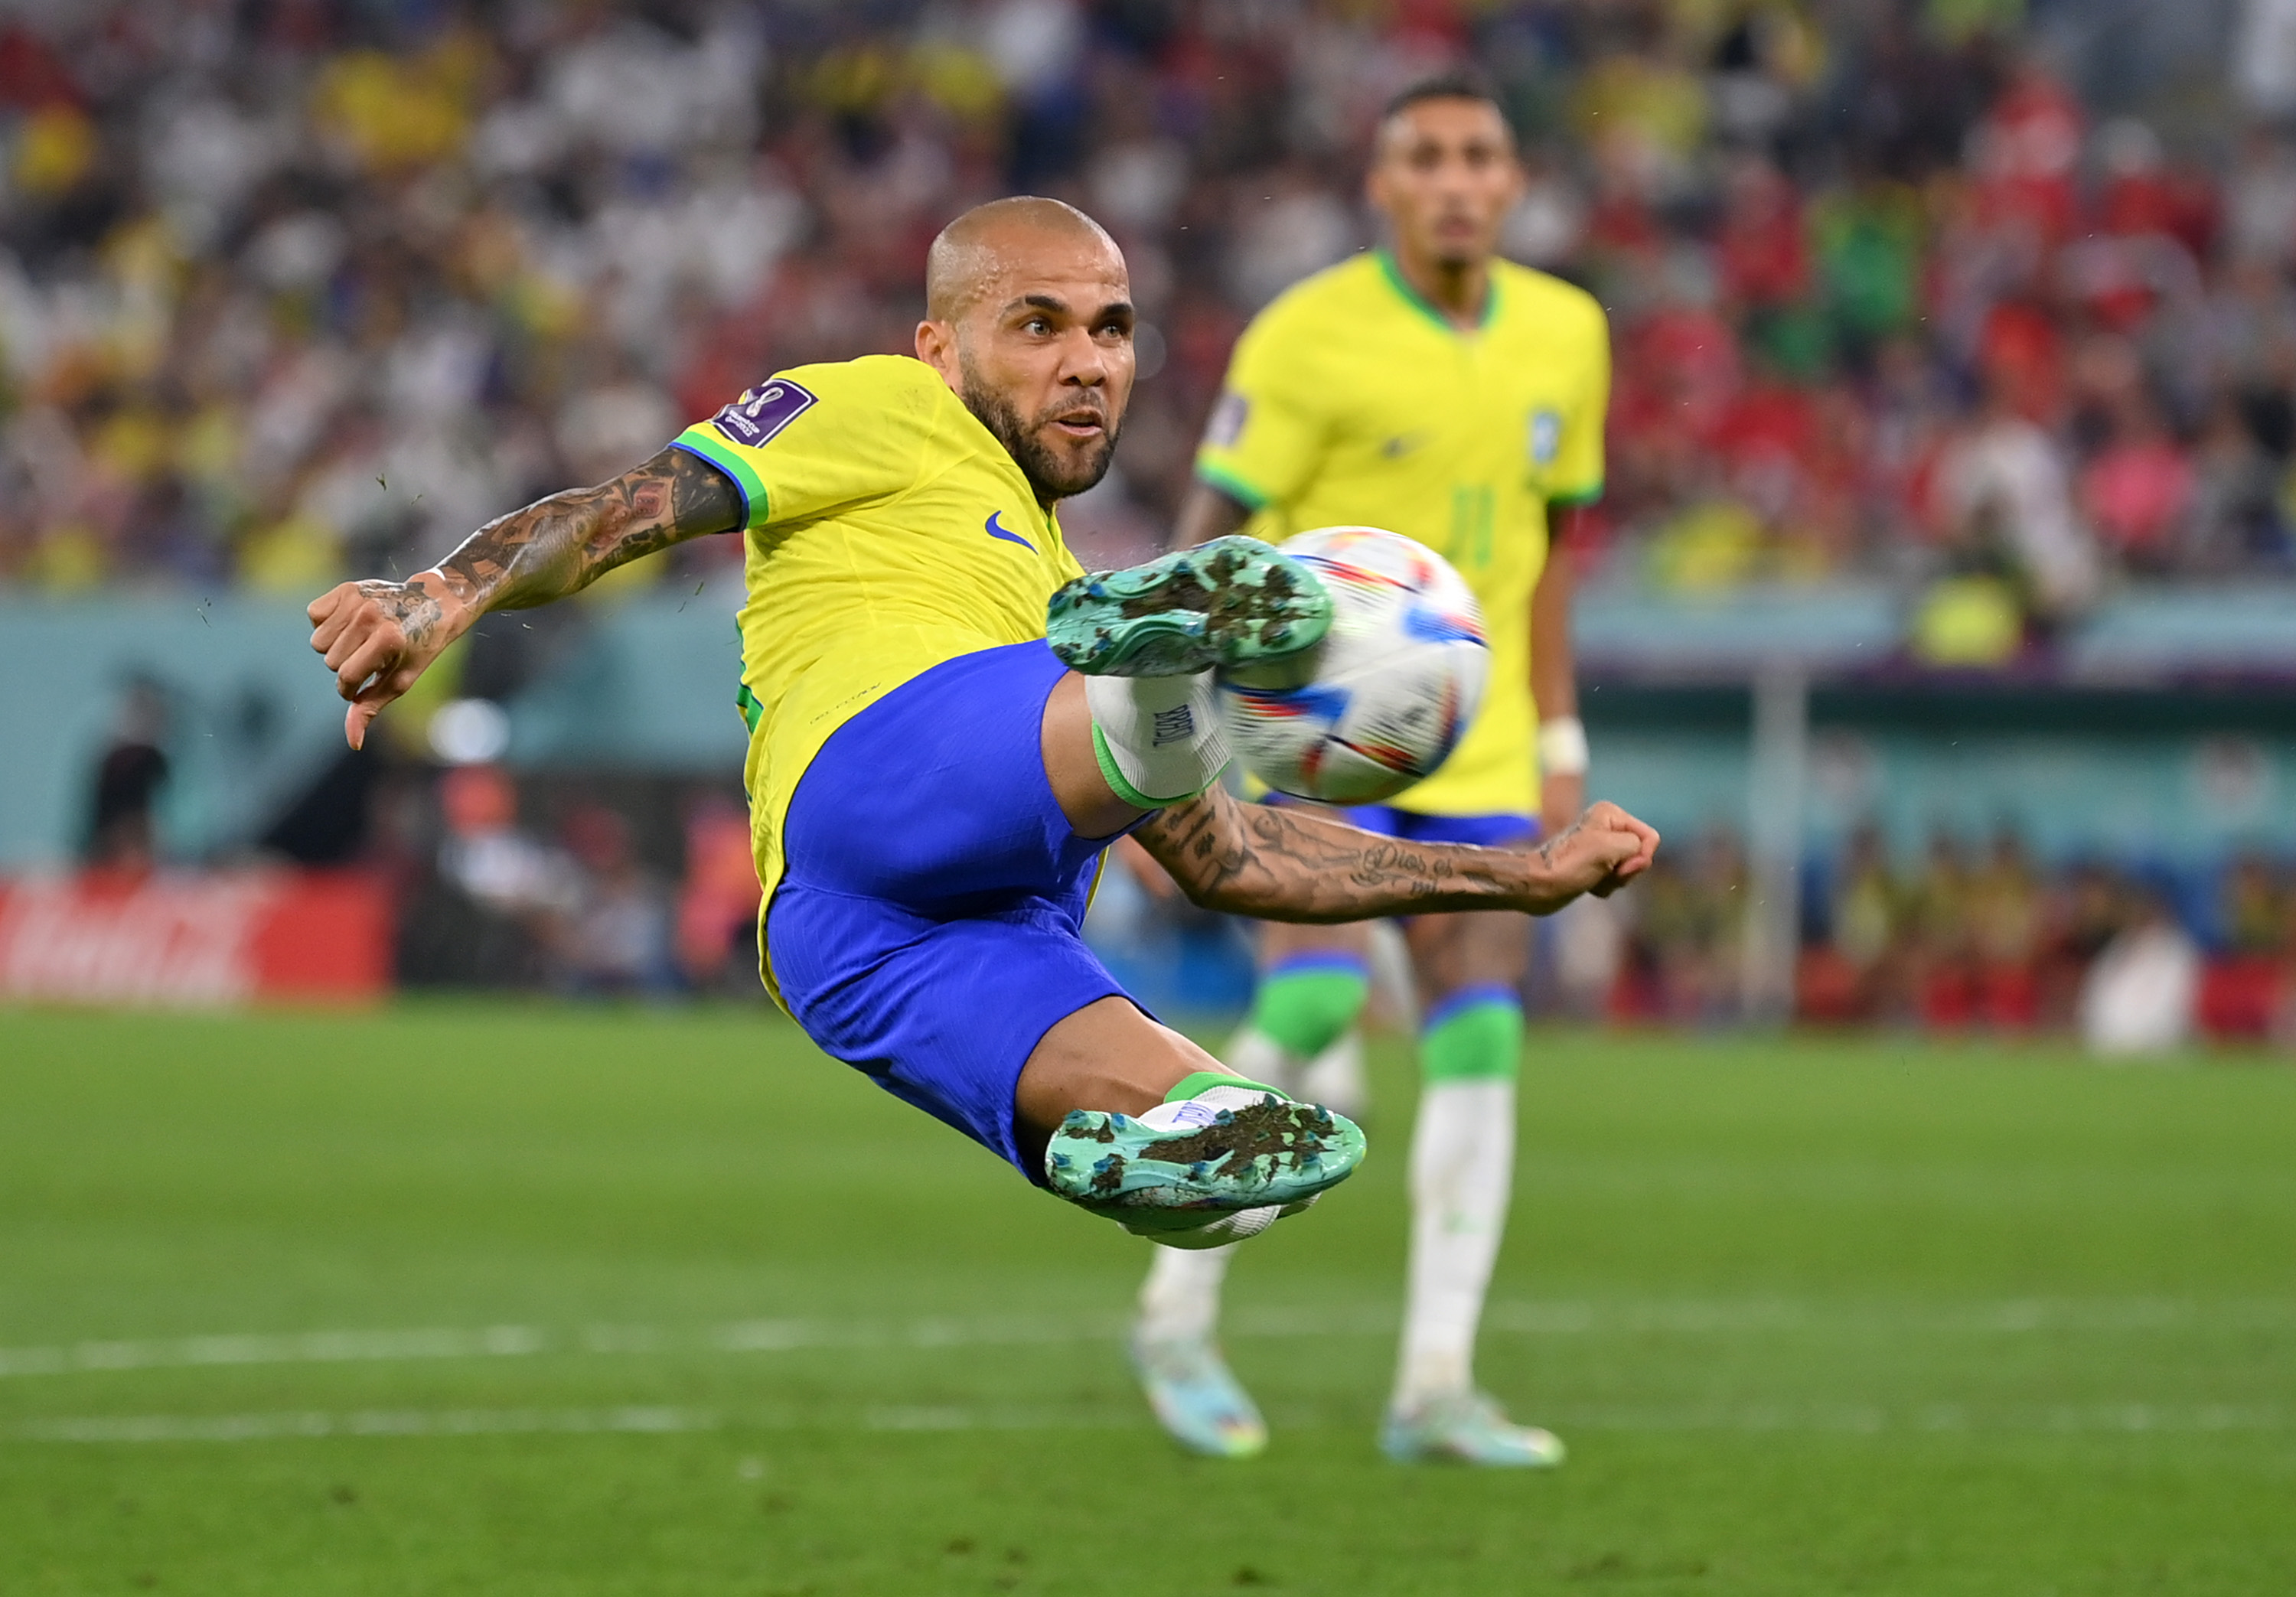 The offer from Brazil that attacked the tranquility of Pumas de la UNAM with Dani Alves